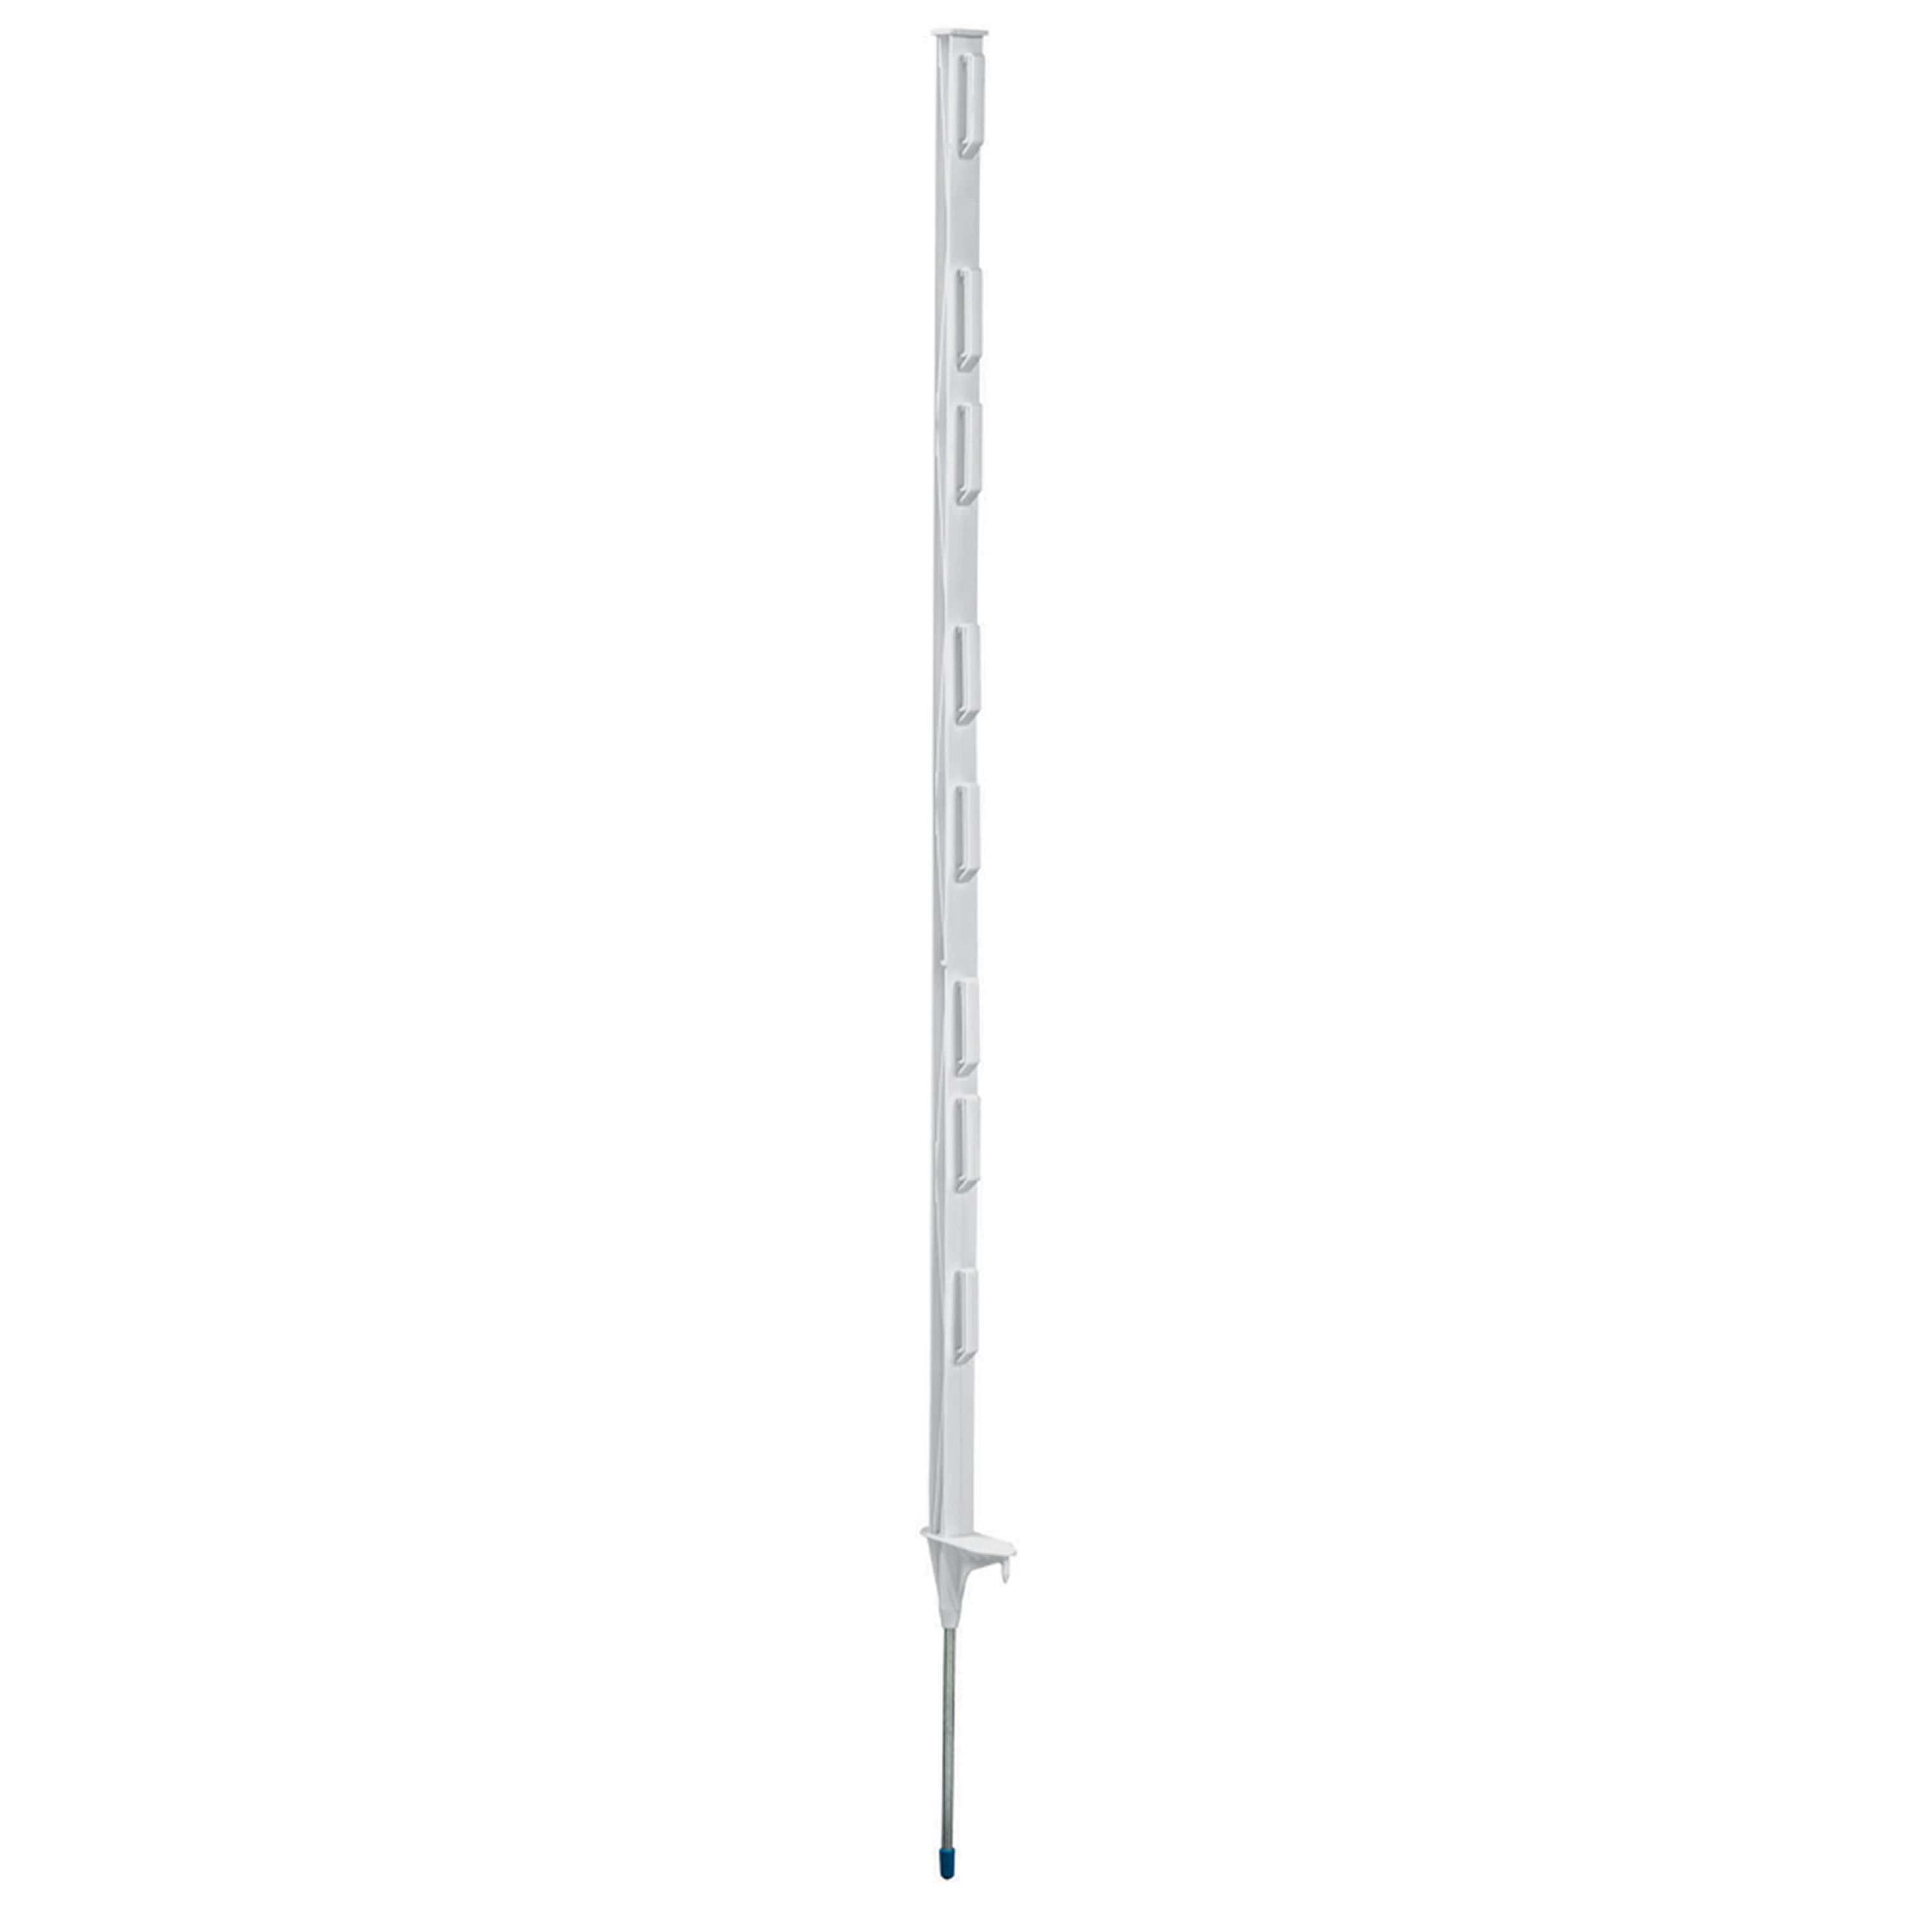 Fi-Shock 1-in x 3.38-ft Plastic Electric Fence Post | Lowe's